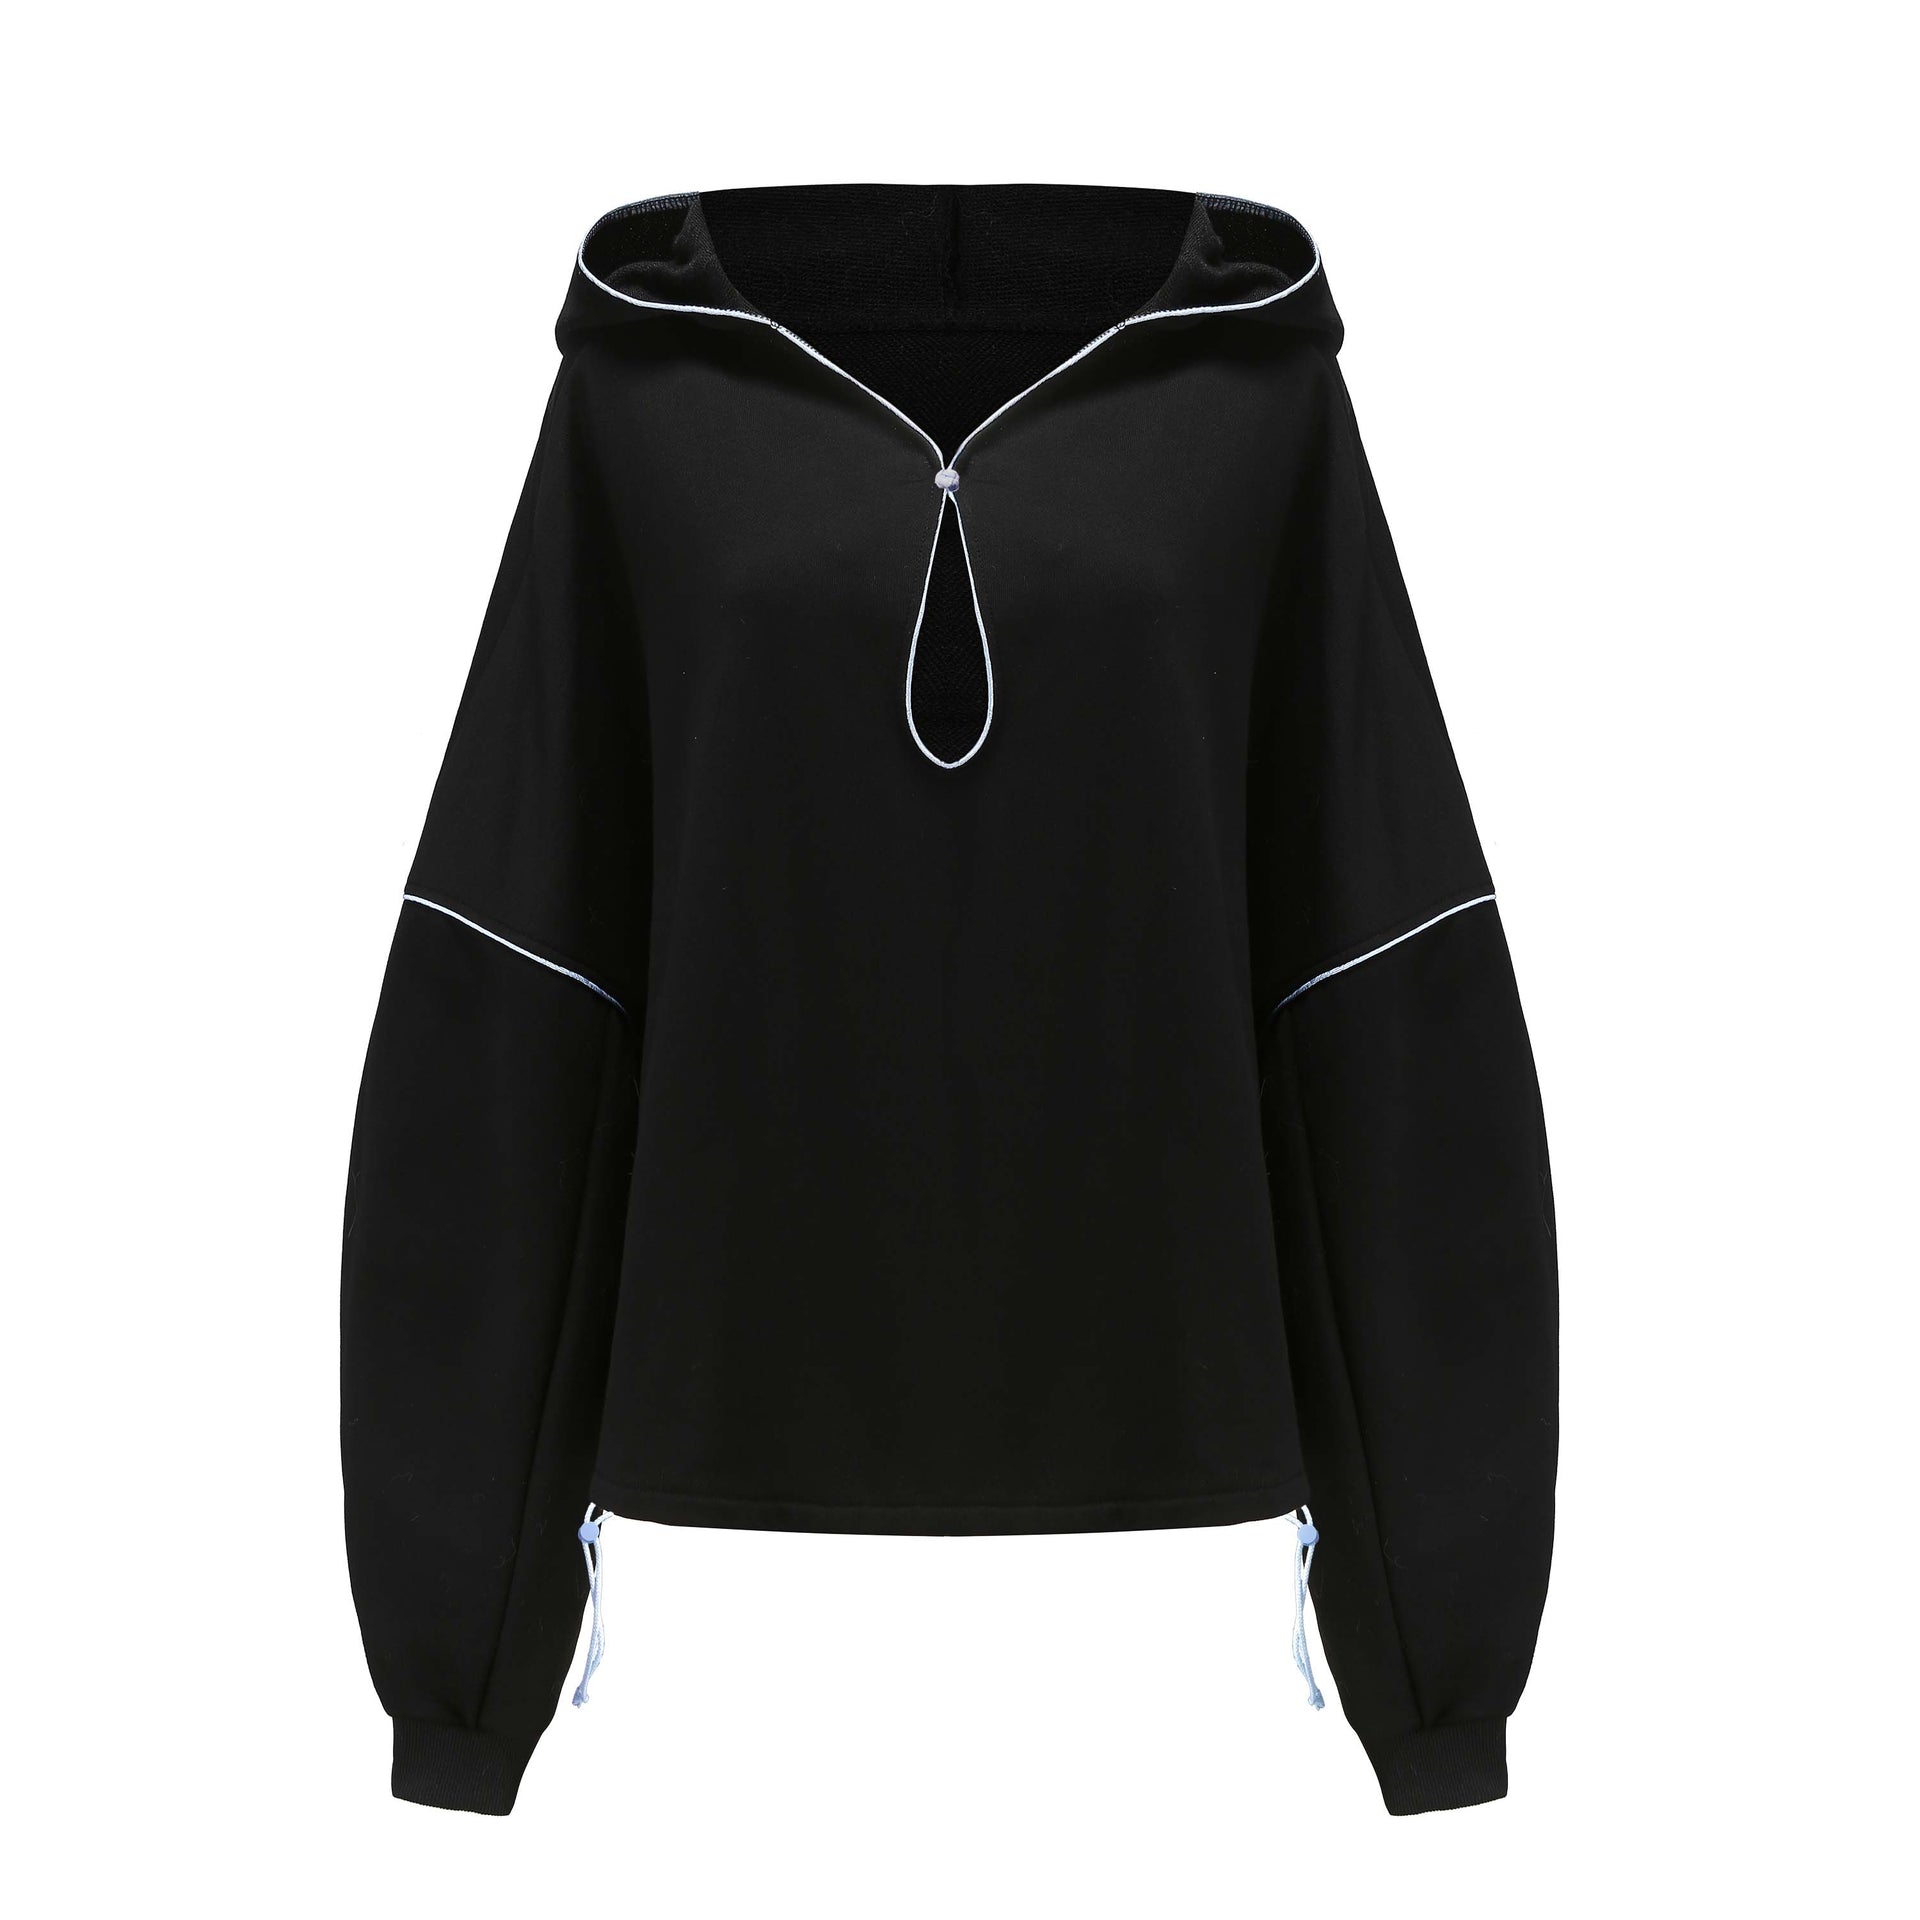 Mugwort x DAWANG Open Neck Drawstring Adjustable Hoodie, Drop Shoulder Oversized Fit,Contrast Color Piping, Center Front Knot Button, back